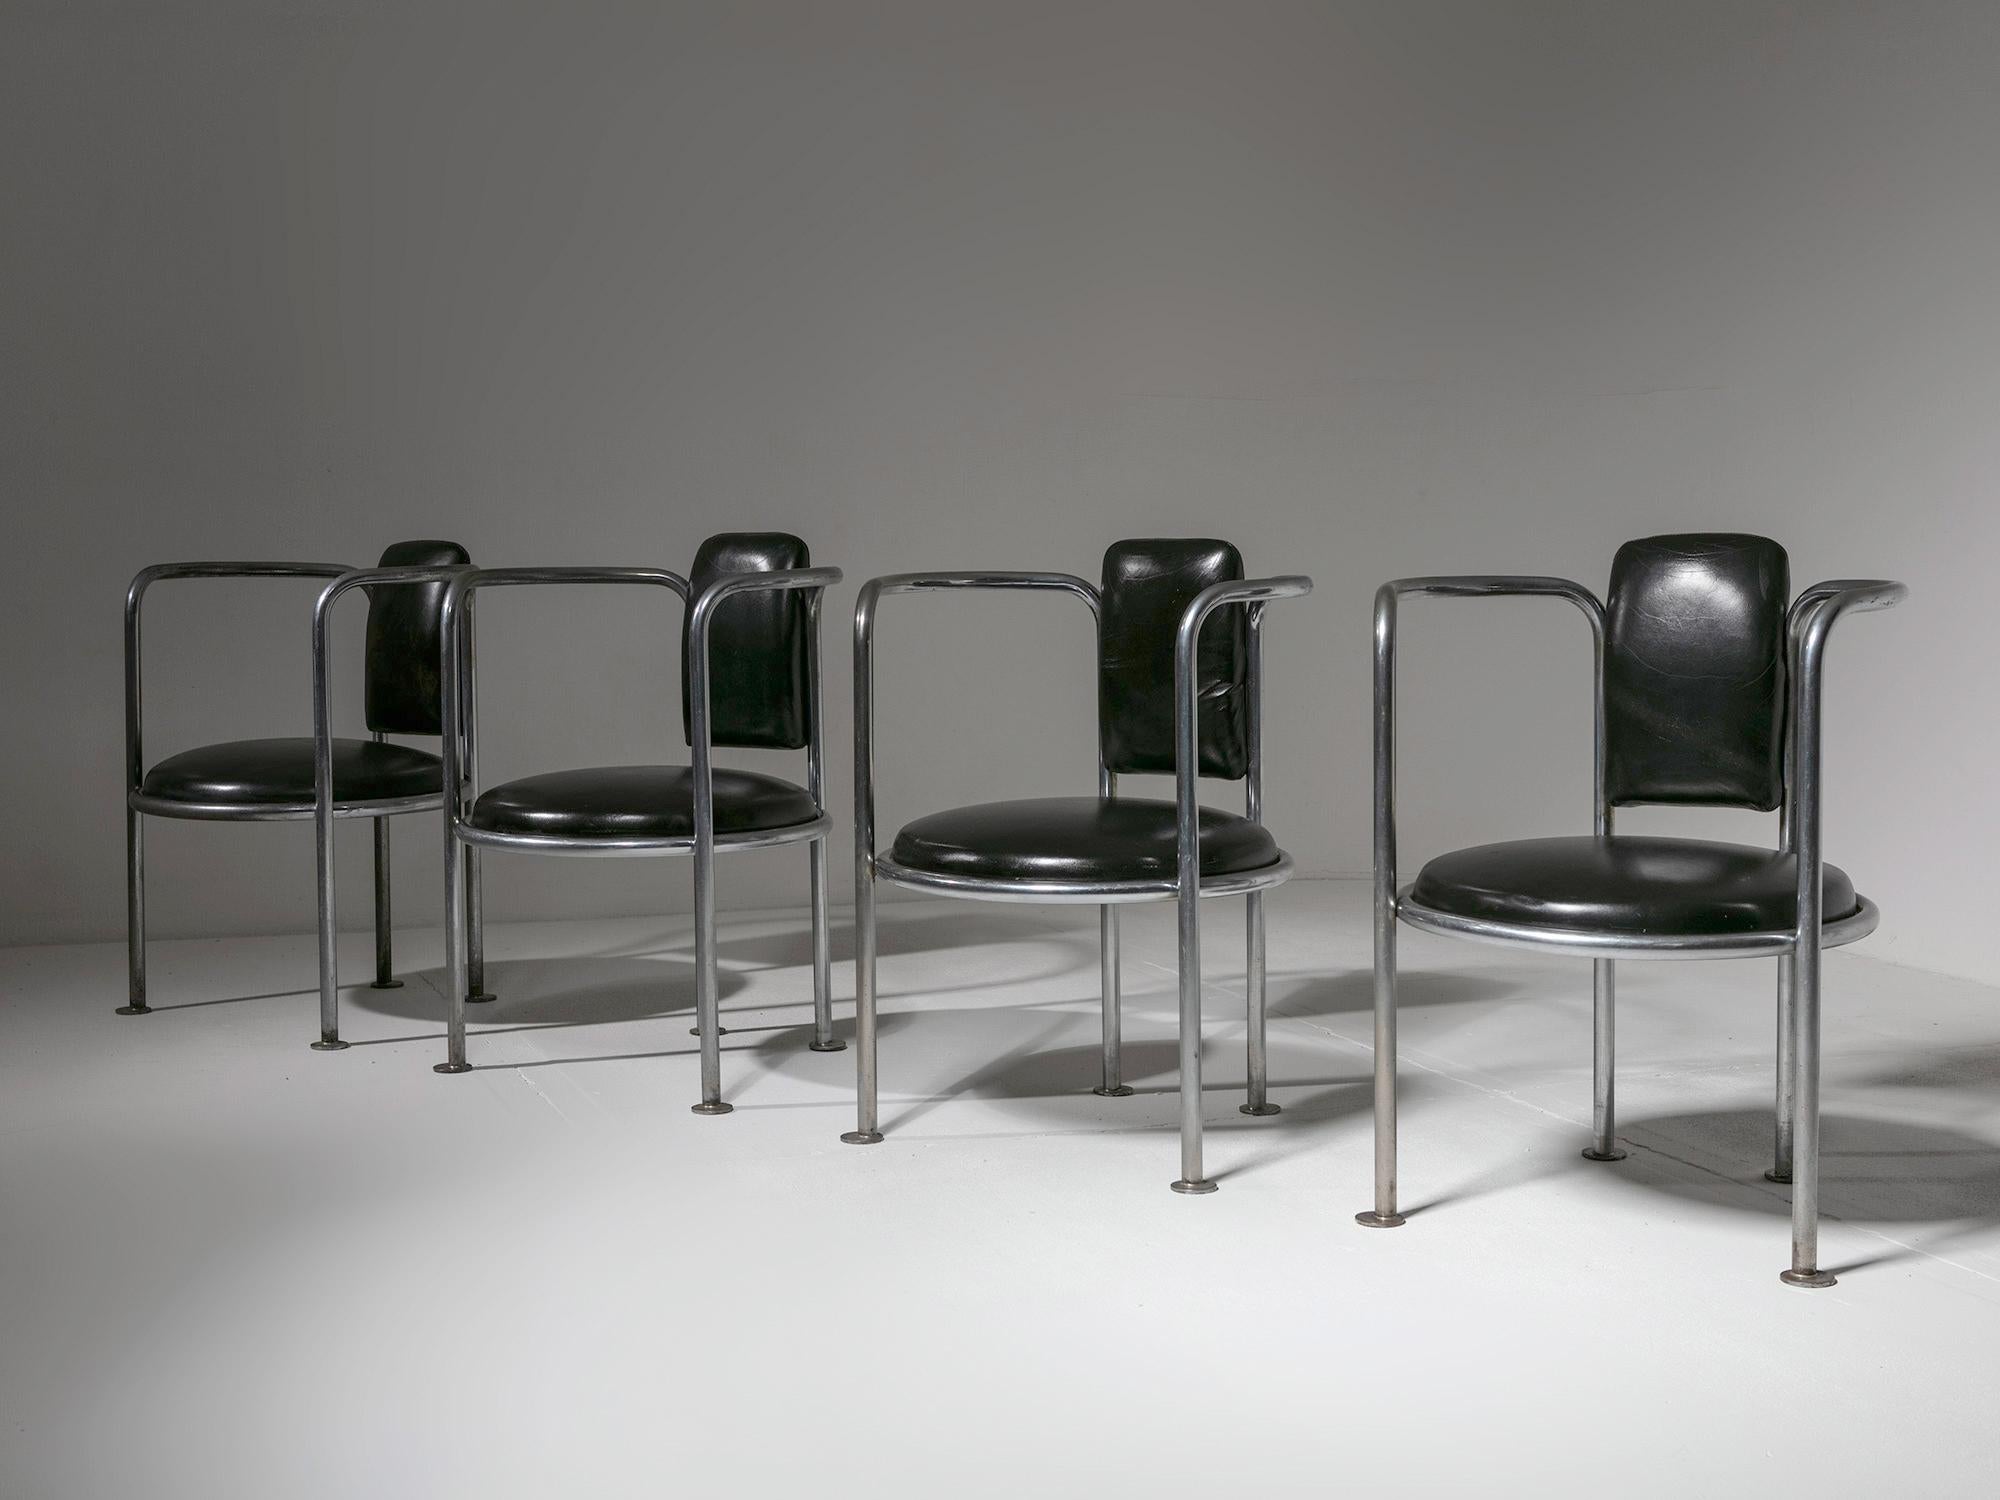 10 Chrome Black Leather Armchairs in the style of Gae Aulenti Poltronova, 1960s For Sale 1